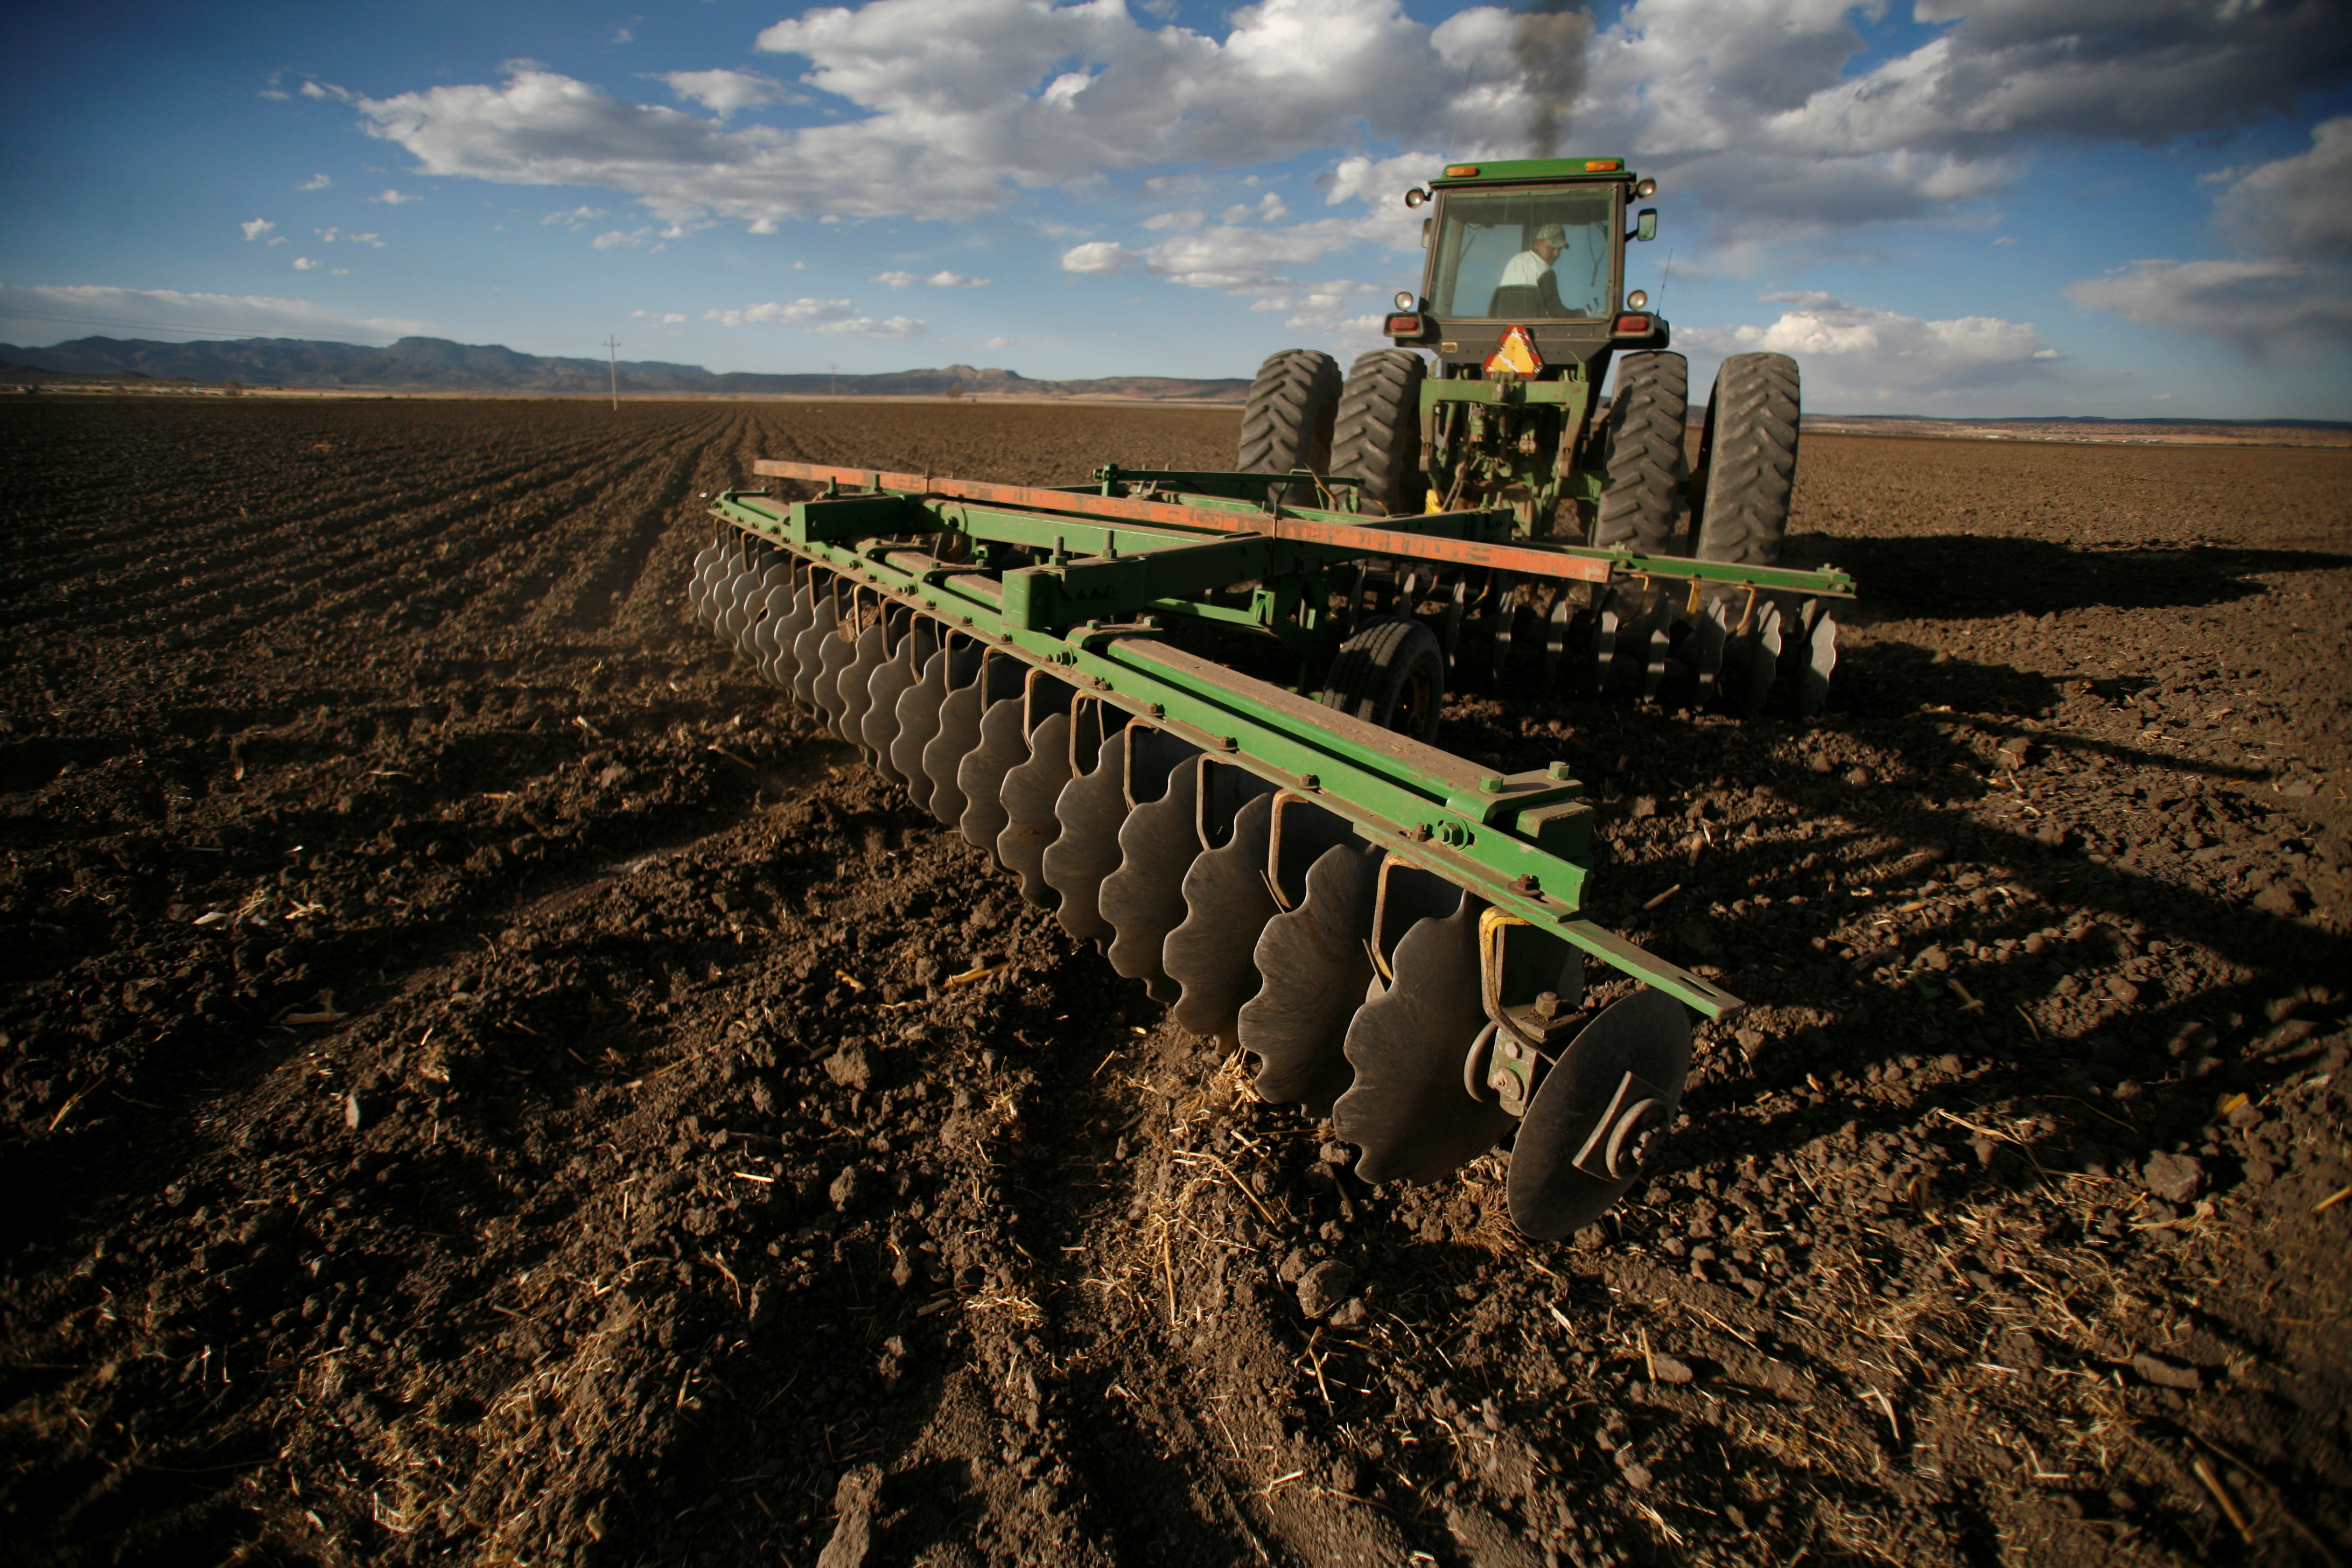 A tractor ploughs a hectare of land at Ejido Benito Juarez in the northern Mexican state of Chihuahua